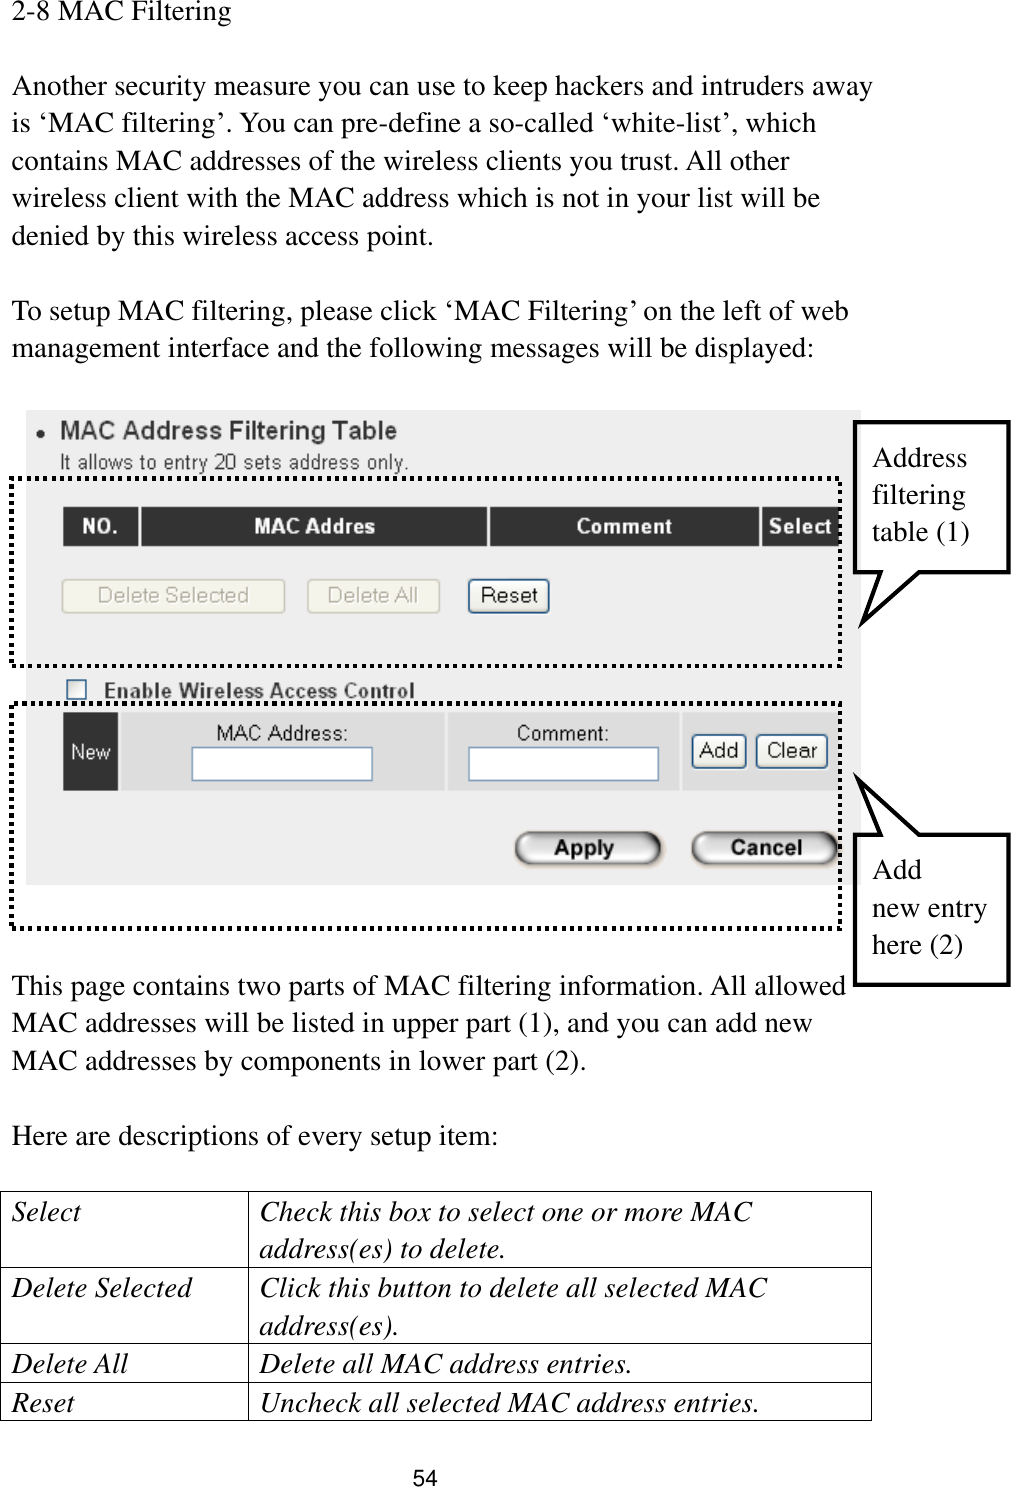 54 2-8 MAC Filtering  Another security measure you can use to keep hackers and intruders away is „MAC filtering‟. You can pre-define a so-called „white-list‟, which contains MAC addresses of the wireless clients you trust. All other wireless client with the MAC address which is not in your list will be denied by this wireless access point.  To setup MAC filtering, please click „MAC Filtering‟ on the left of web management interface and the following messages will be displayed:       This page contains two parts of MAC filtering information. All allowed MAC addresses will be listed in upper part (1), and you can add new MAC addresses by components in lower part (2).  Here are descriptions of every setup item:  Select Check this box to select one or more MAC address(es) to delete. Delete Selected Click this button to delete all selected MAC address(es). Delete All Delete all MAC address entries. Reset Uncheck all selected MAC address entries. Address filtering   table (1) Add   new entry here (2) 